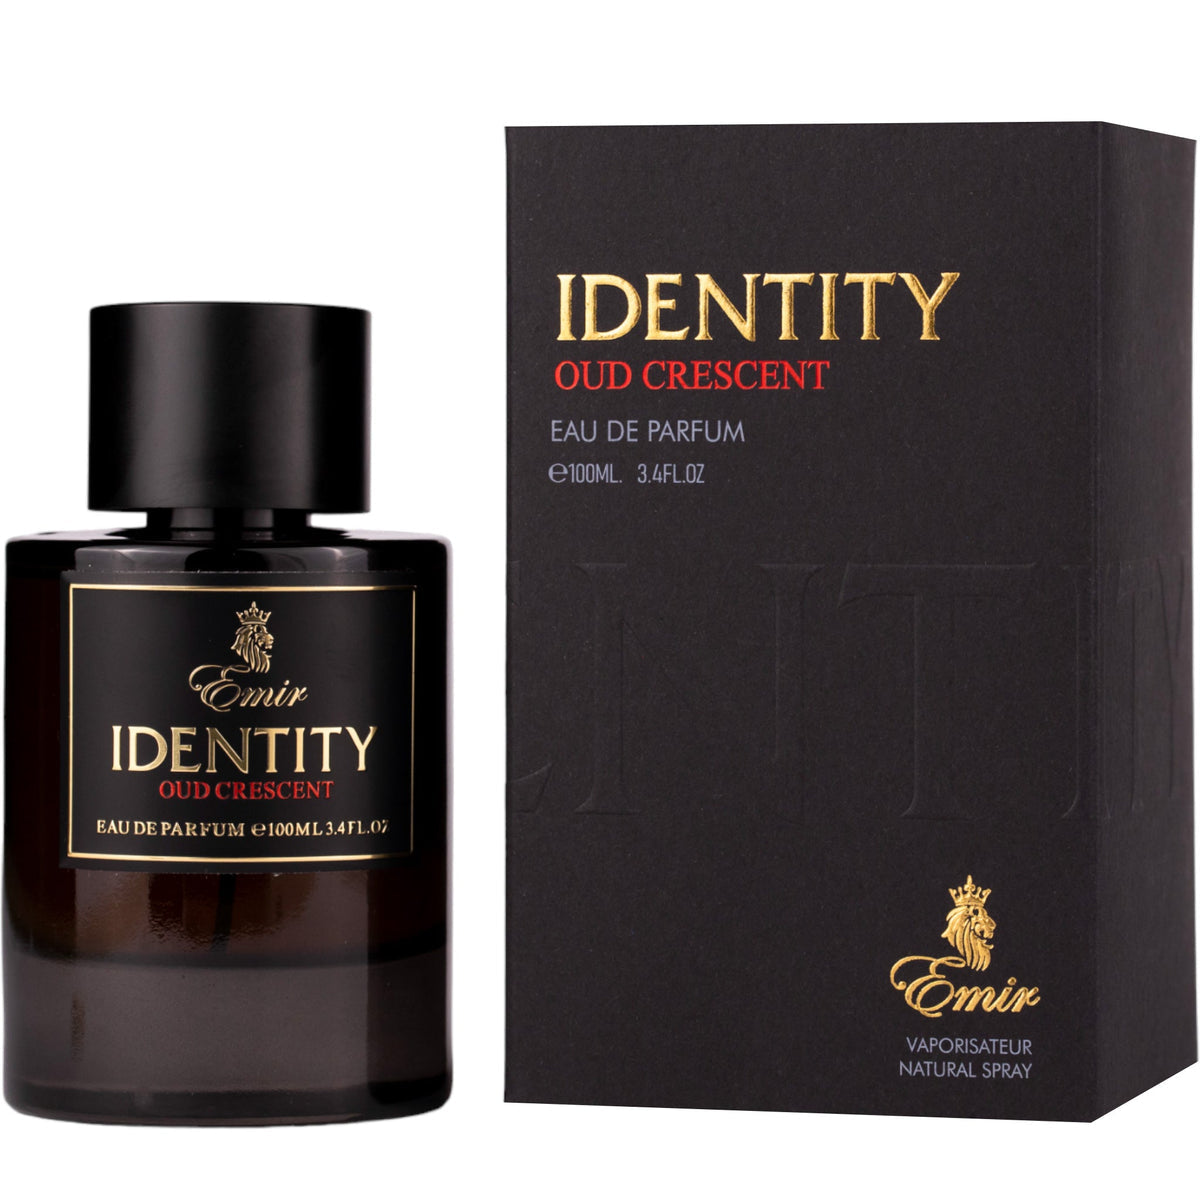 Identity Oud crescent dupe The Moon FM. - Emir